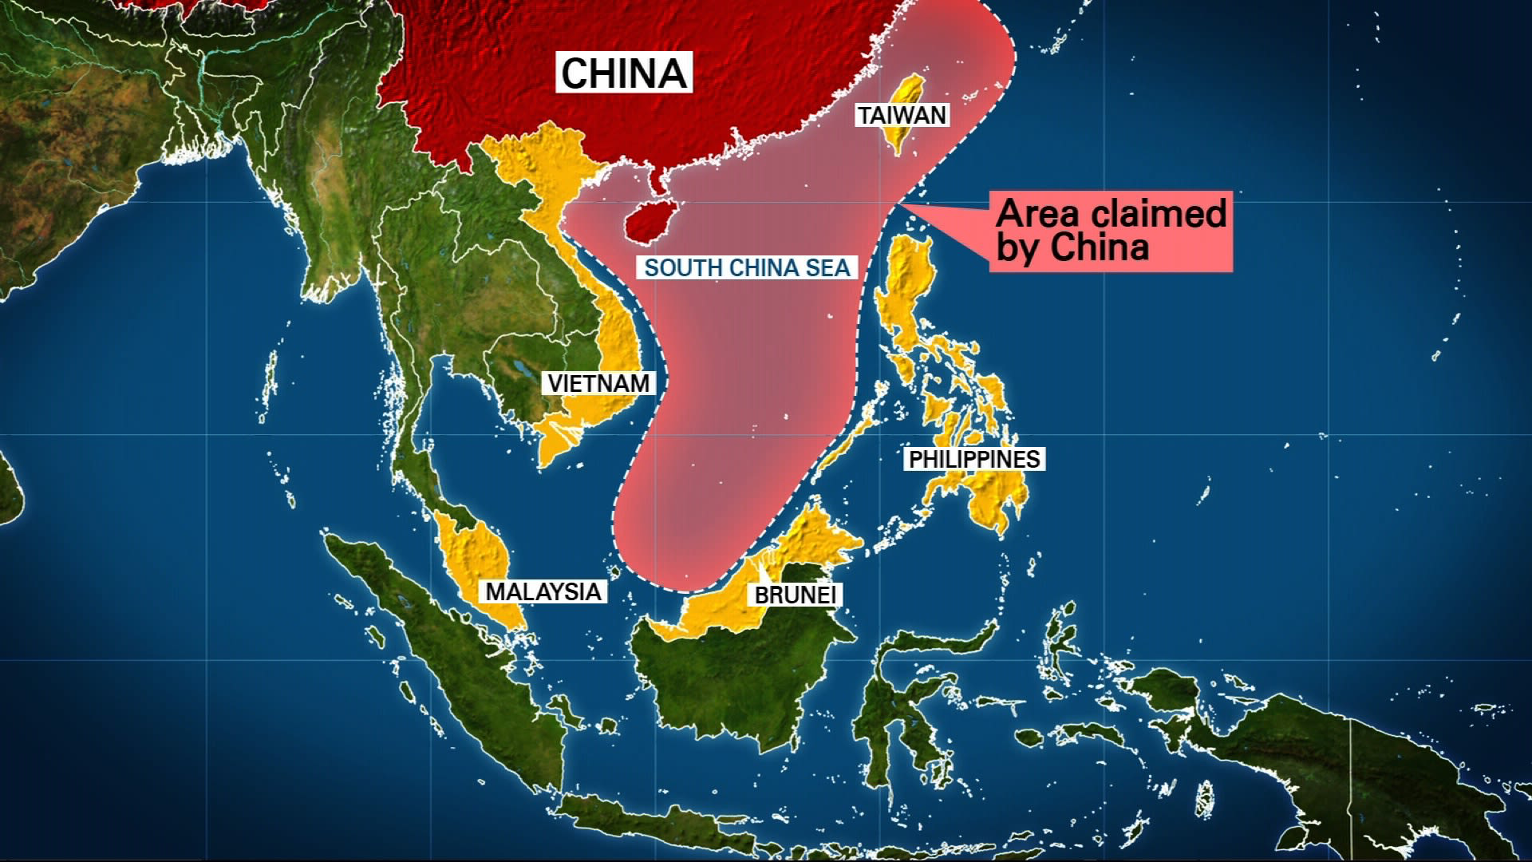 Philippines Accused of 'Illegally' Entering the South China Sea - Asiana Times